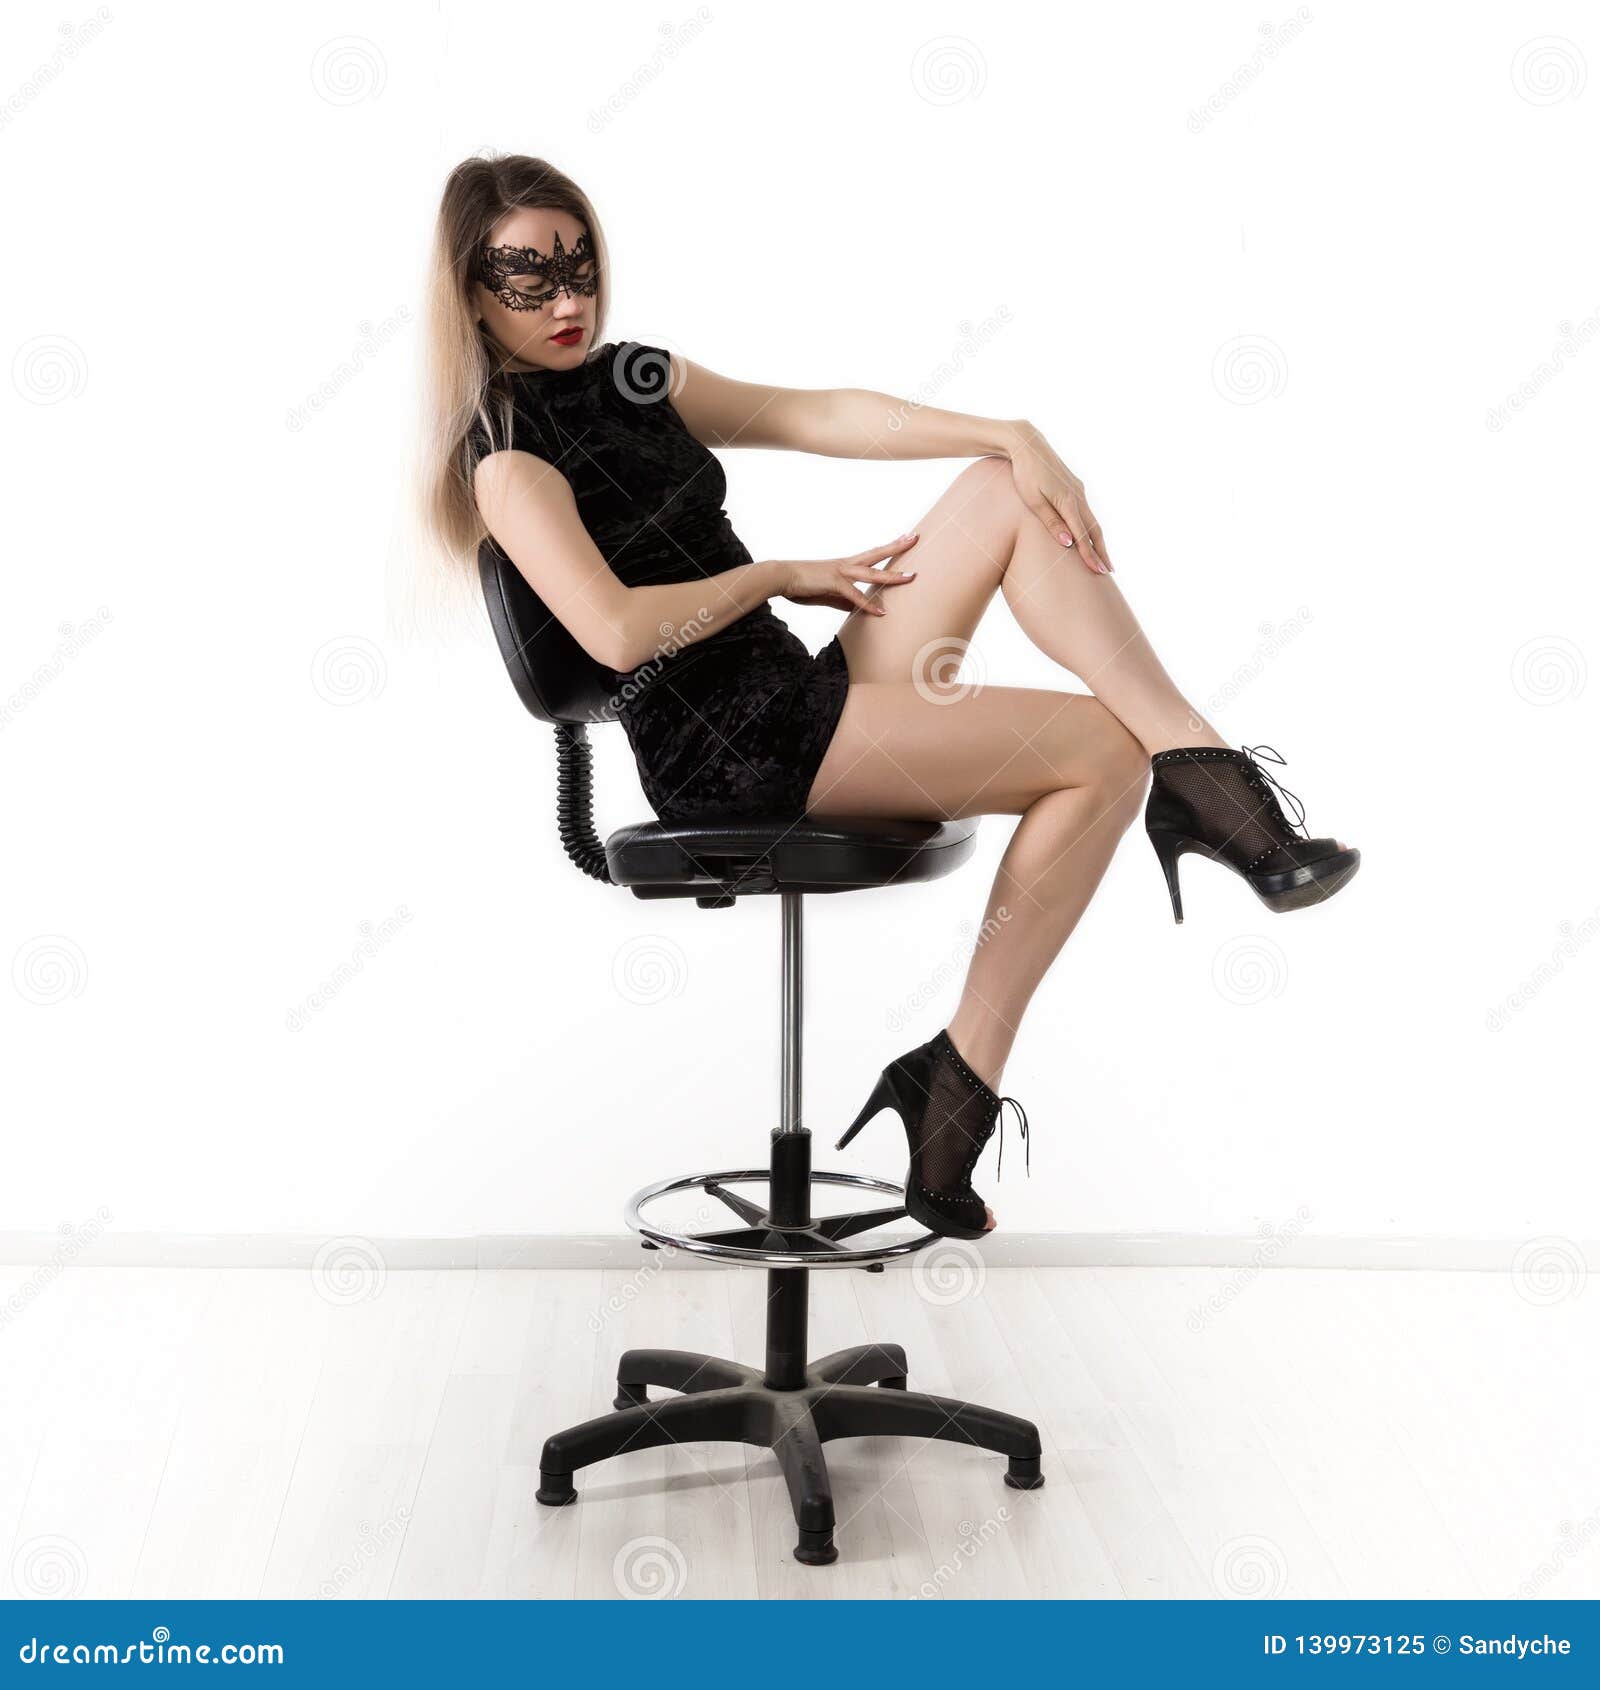 Elegant Womanin a Little Black Dress is Posing while Sitting on a High  Chair and Spreading Her Legs. Girl on a Stock Image - Image of bandeau,  confident: 139973125